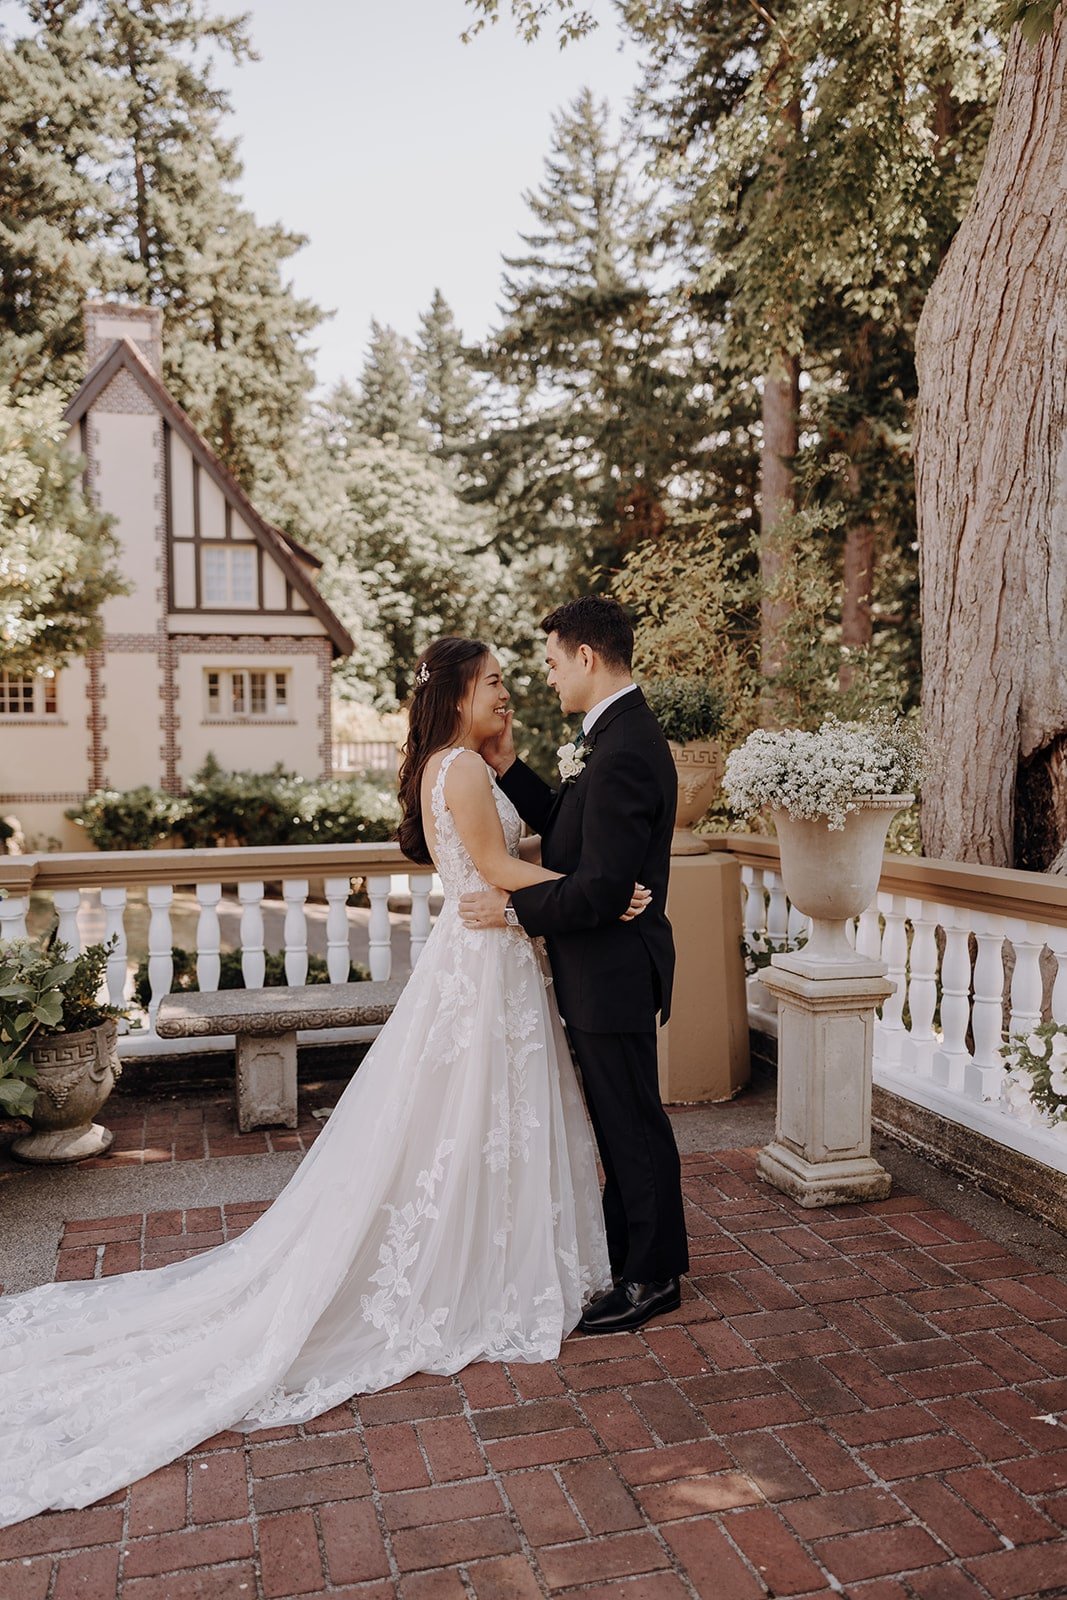 Bride and groom first look at Lairmont Manor wedding venue in Washington